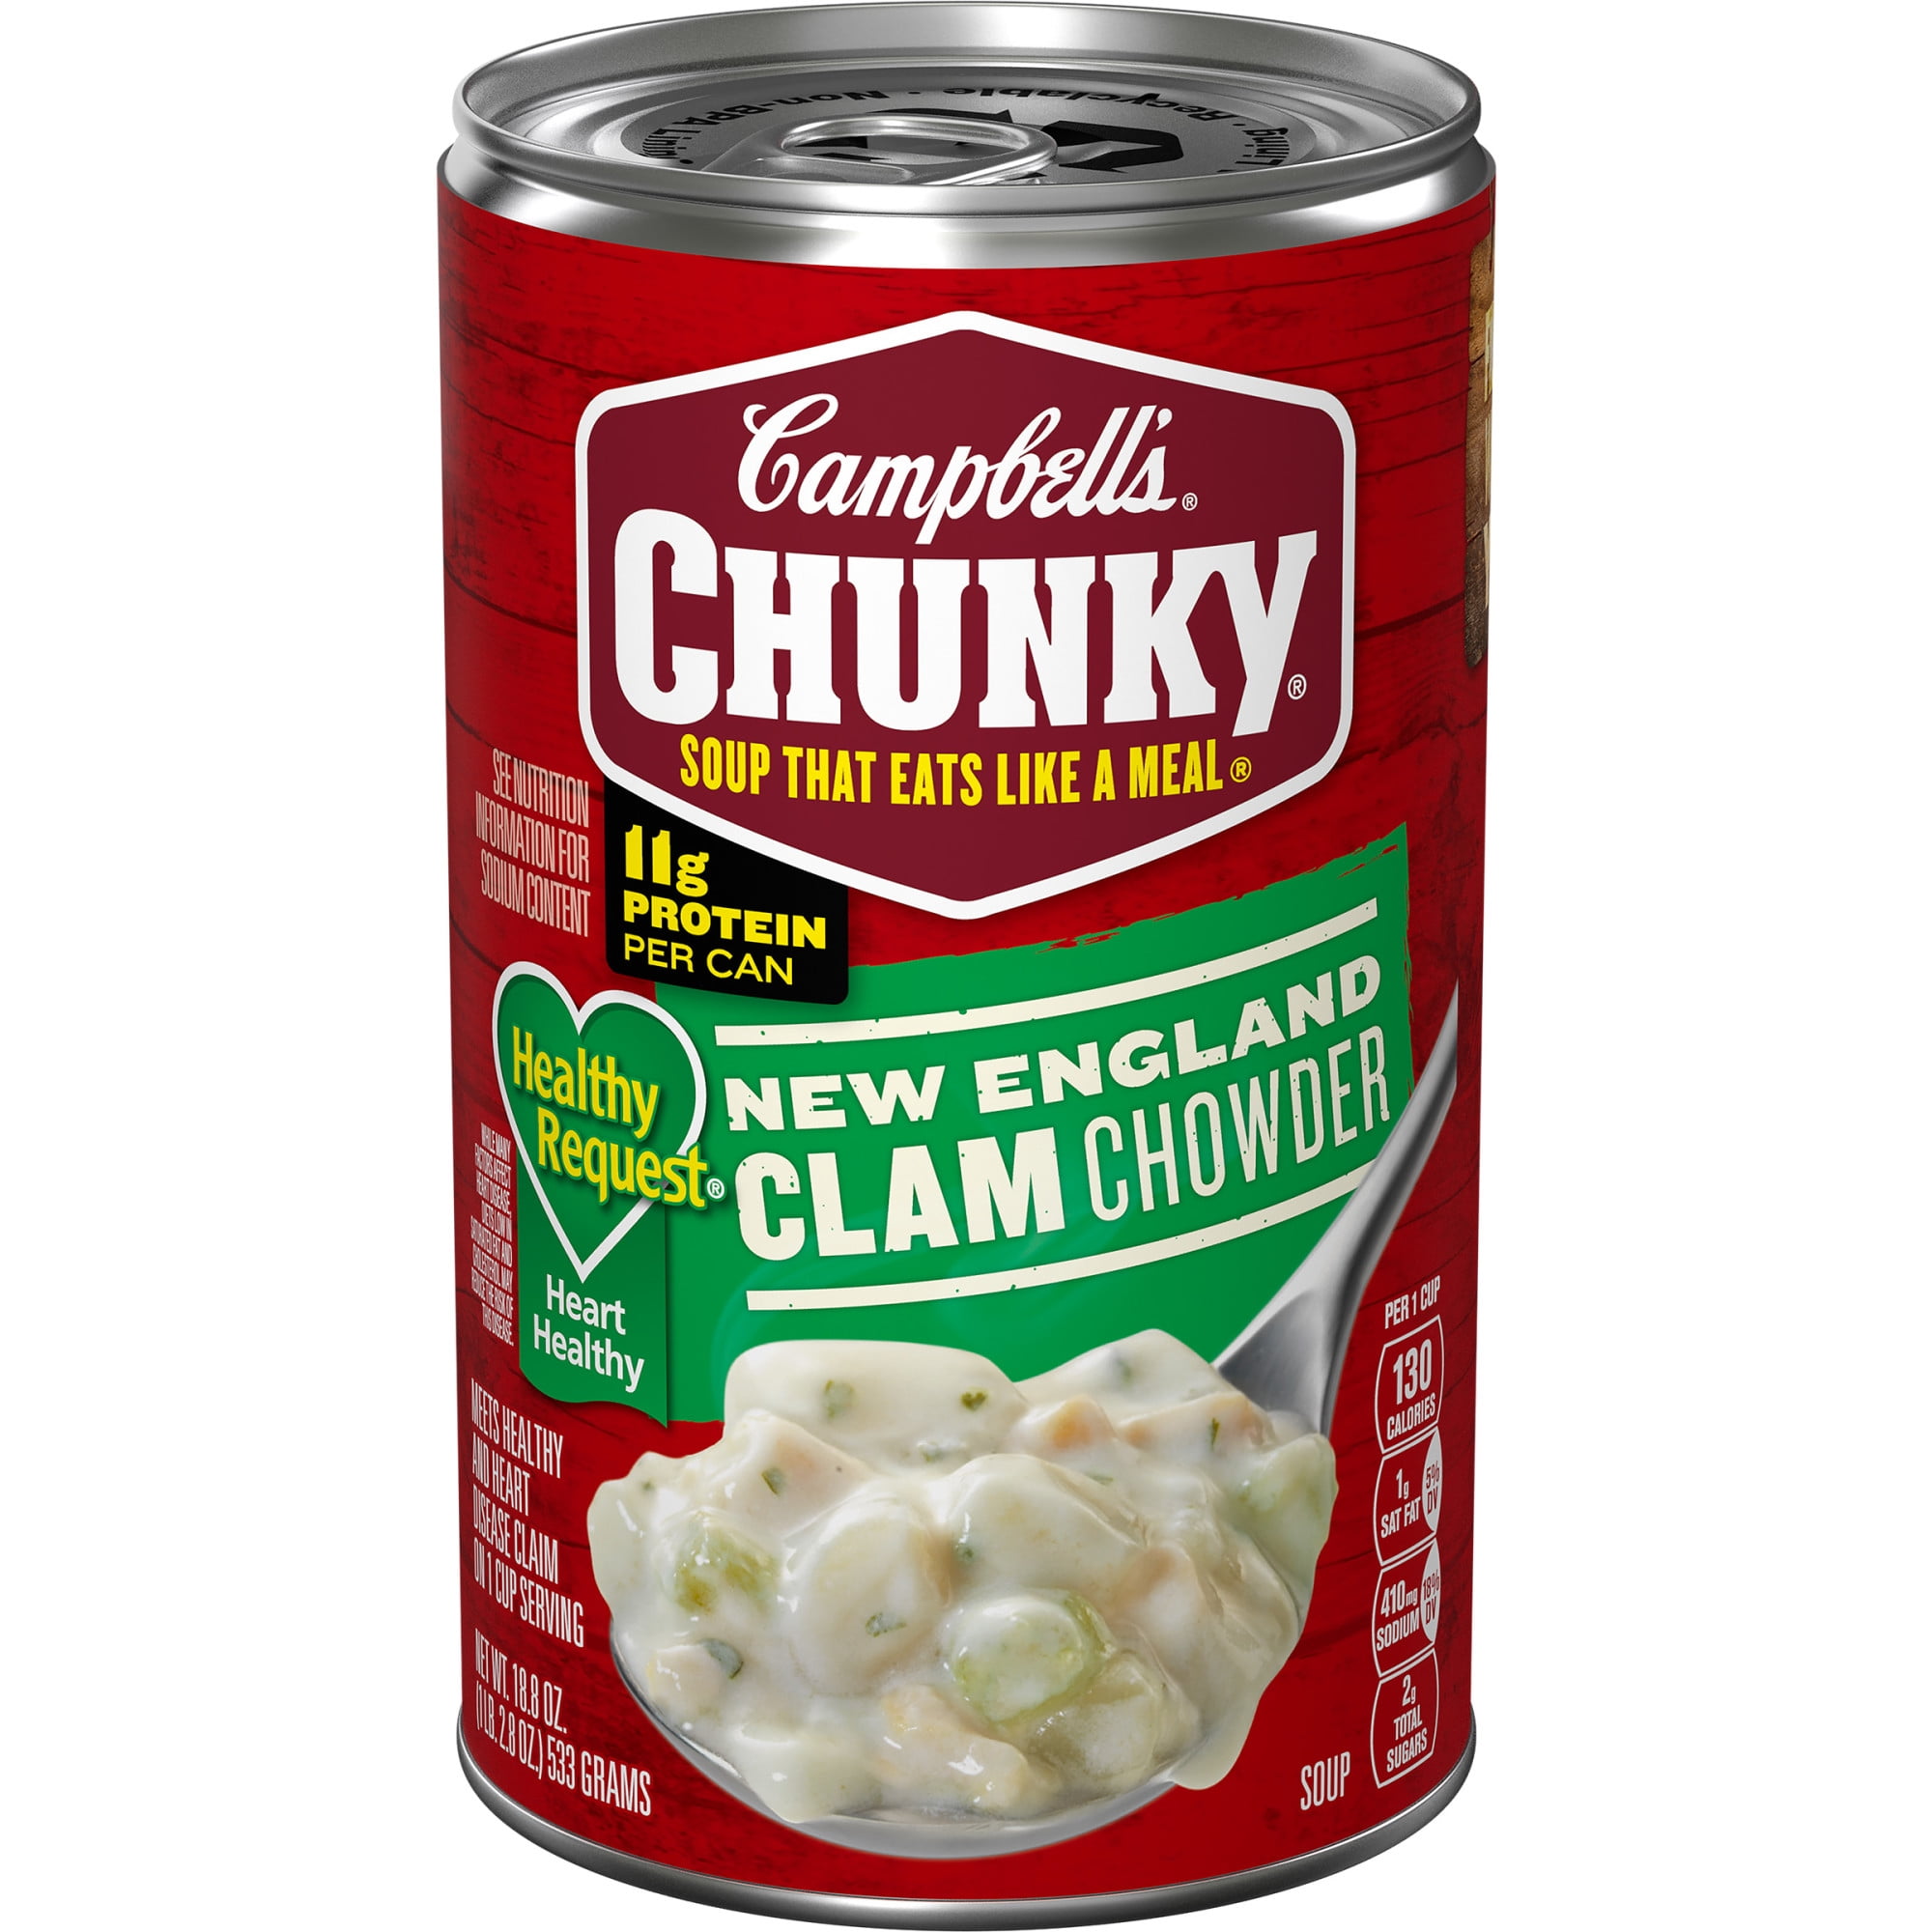 Campbell's Chunky Soup, Ready to Serve Healthy Request New England Clam Chowder, 18.8 Oz Can